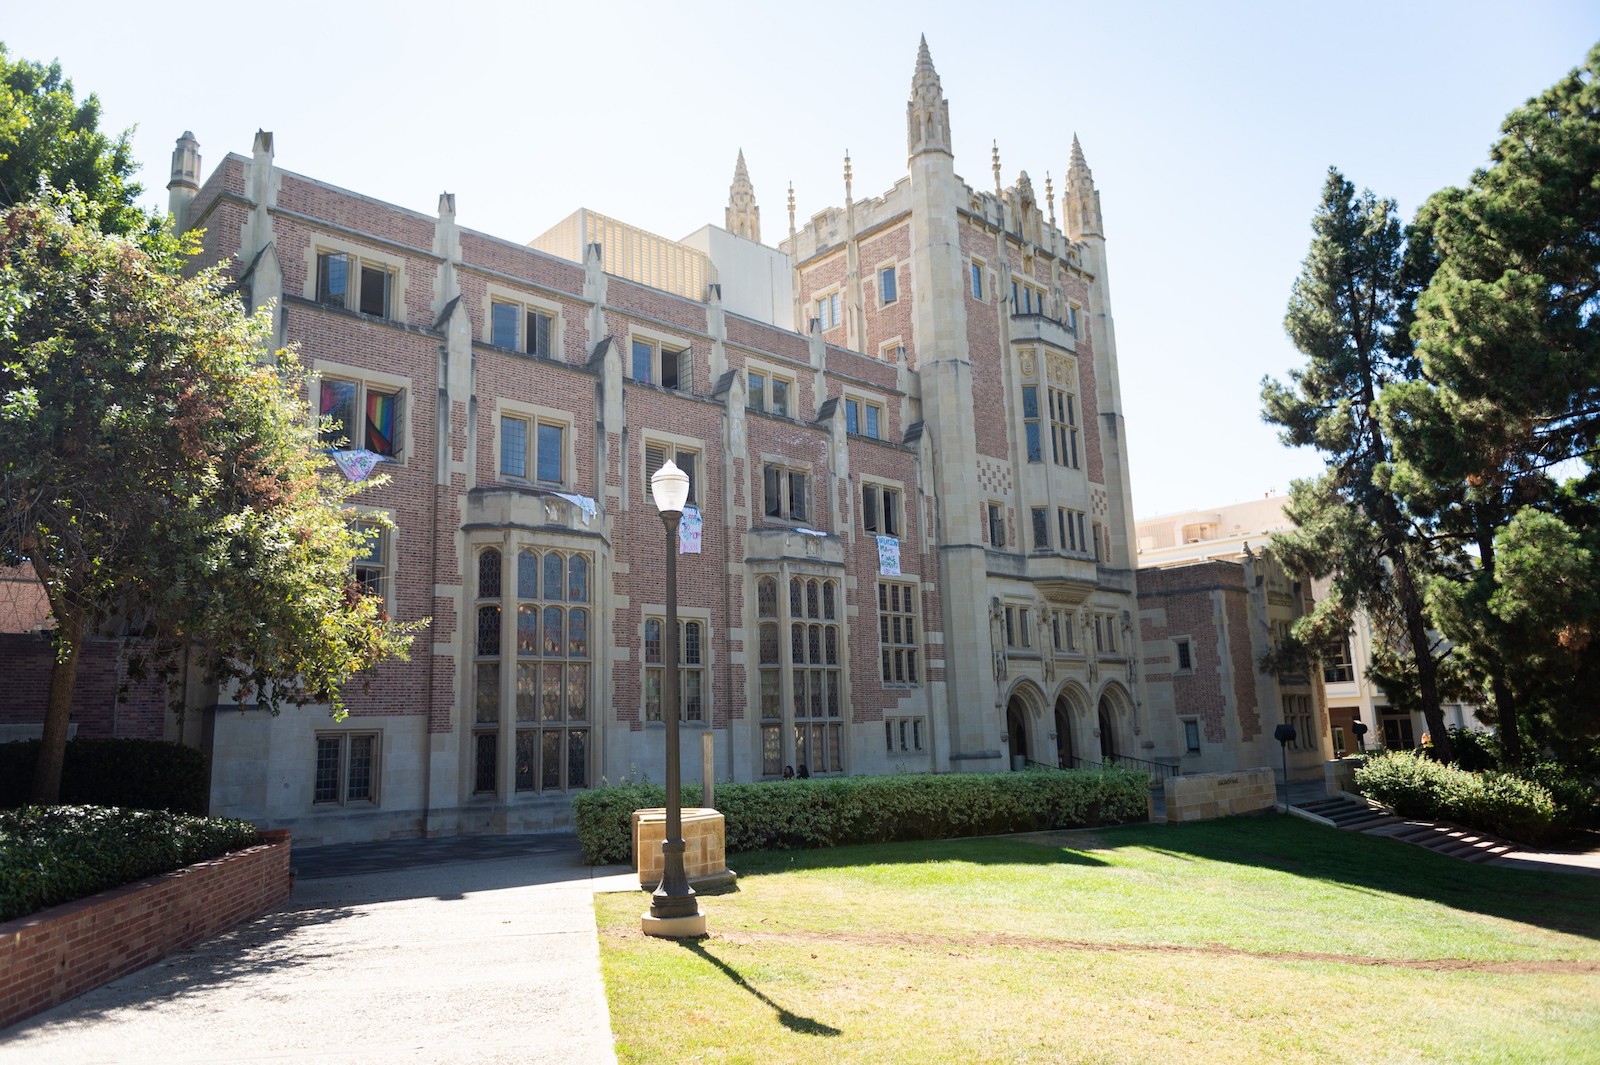 UCLA must adjust tuition, student fees to match the quality of online  instruction - Daily Bruin